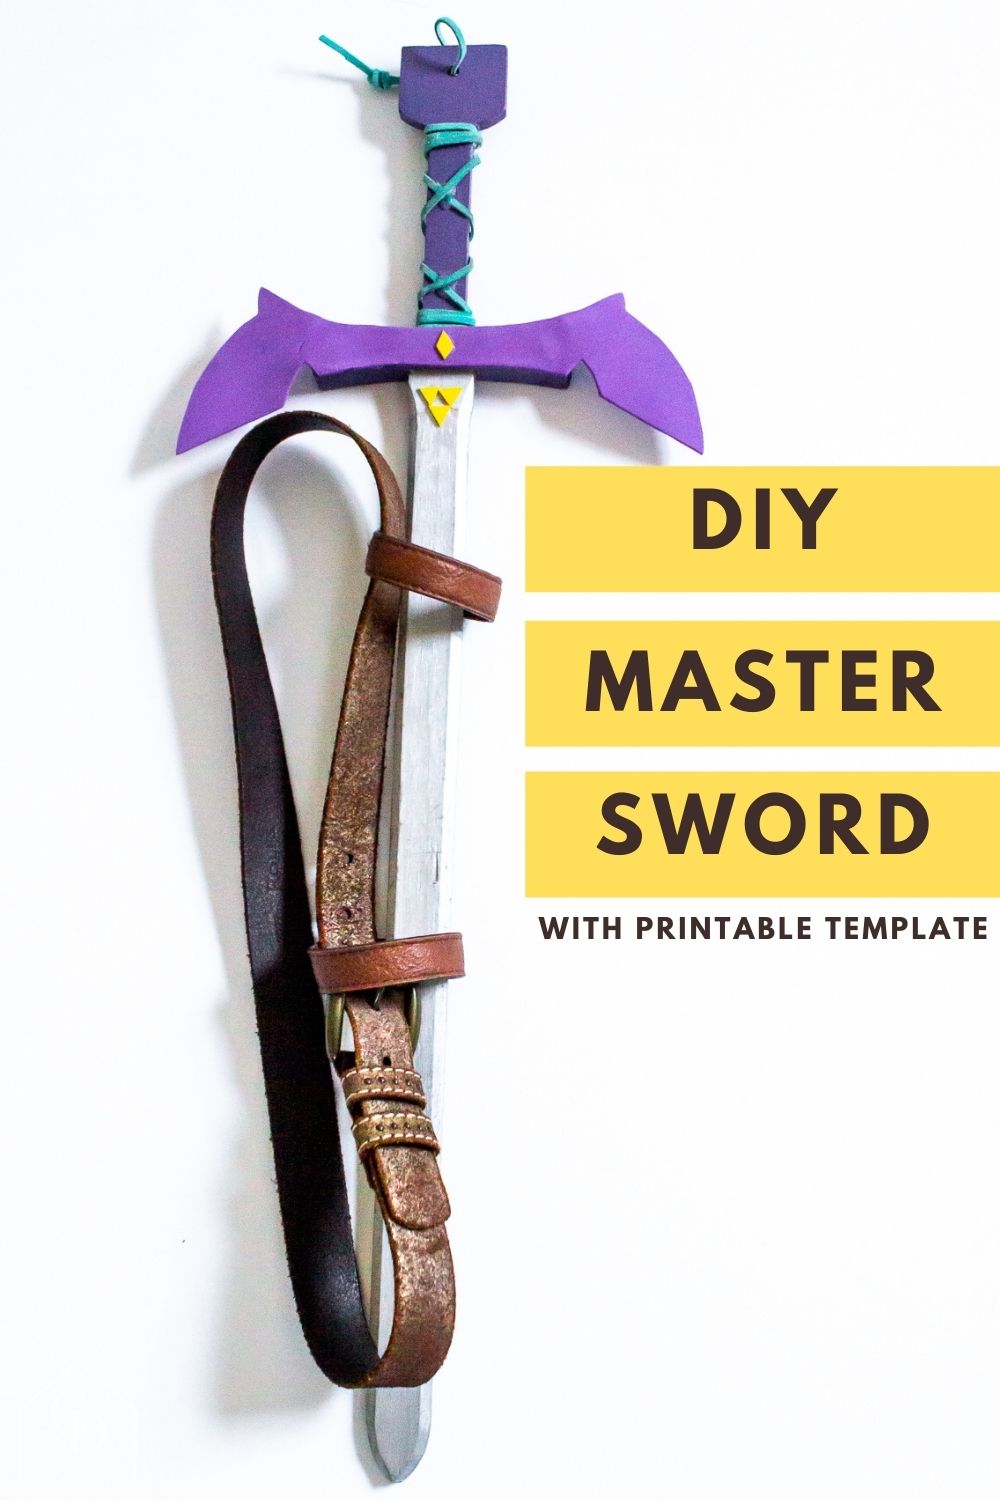 How to Make a Cardboard Sword: Simple Craft Guide